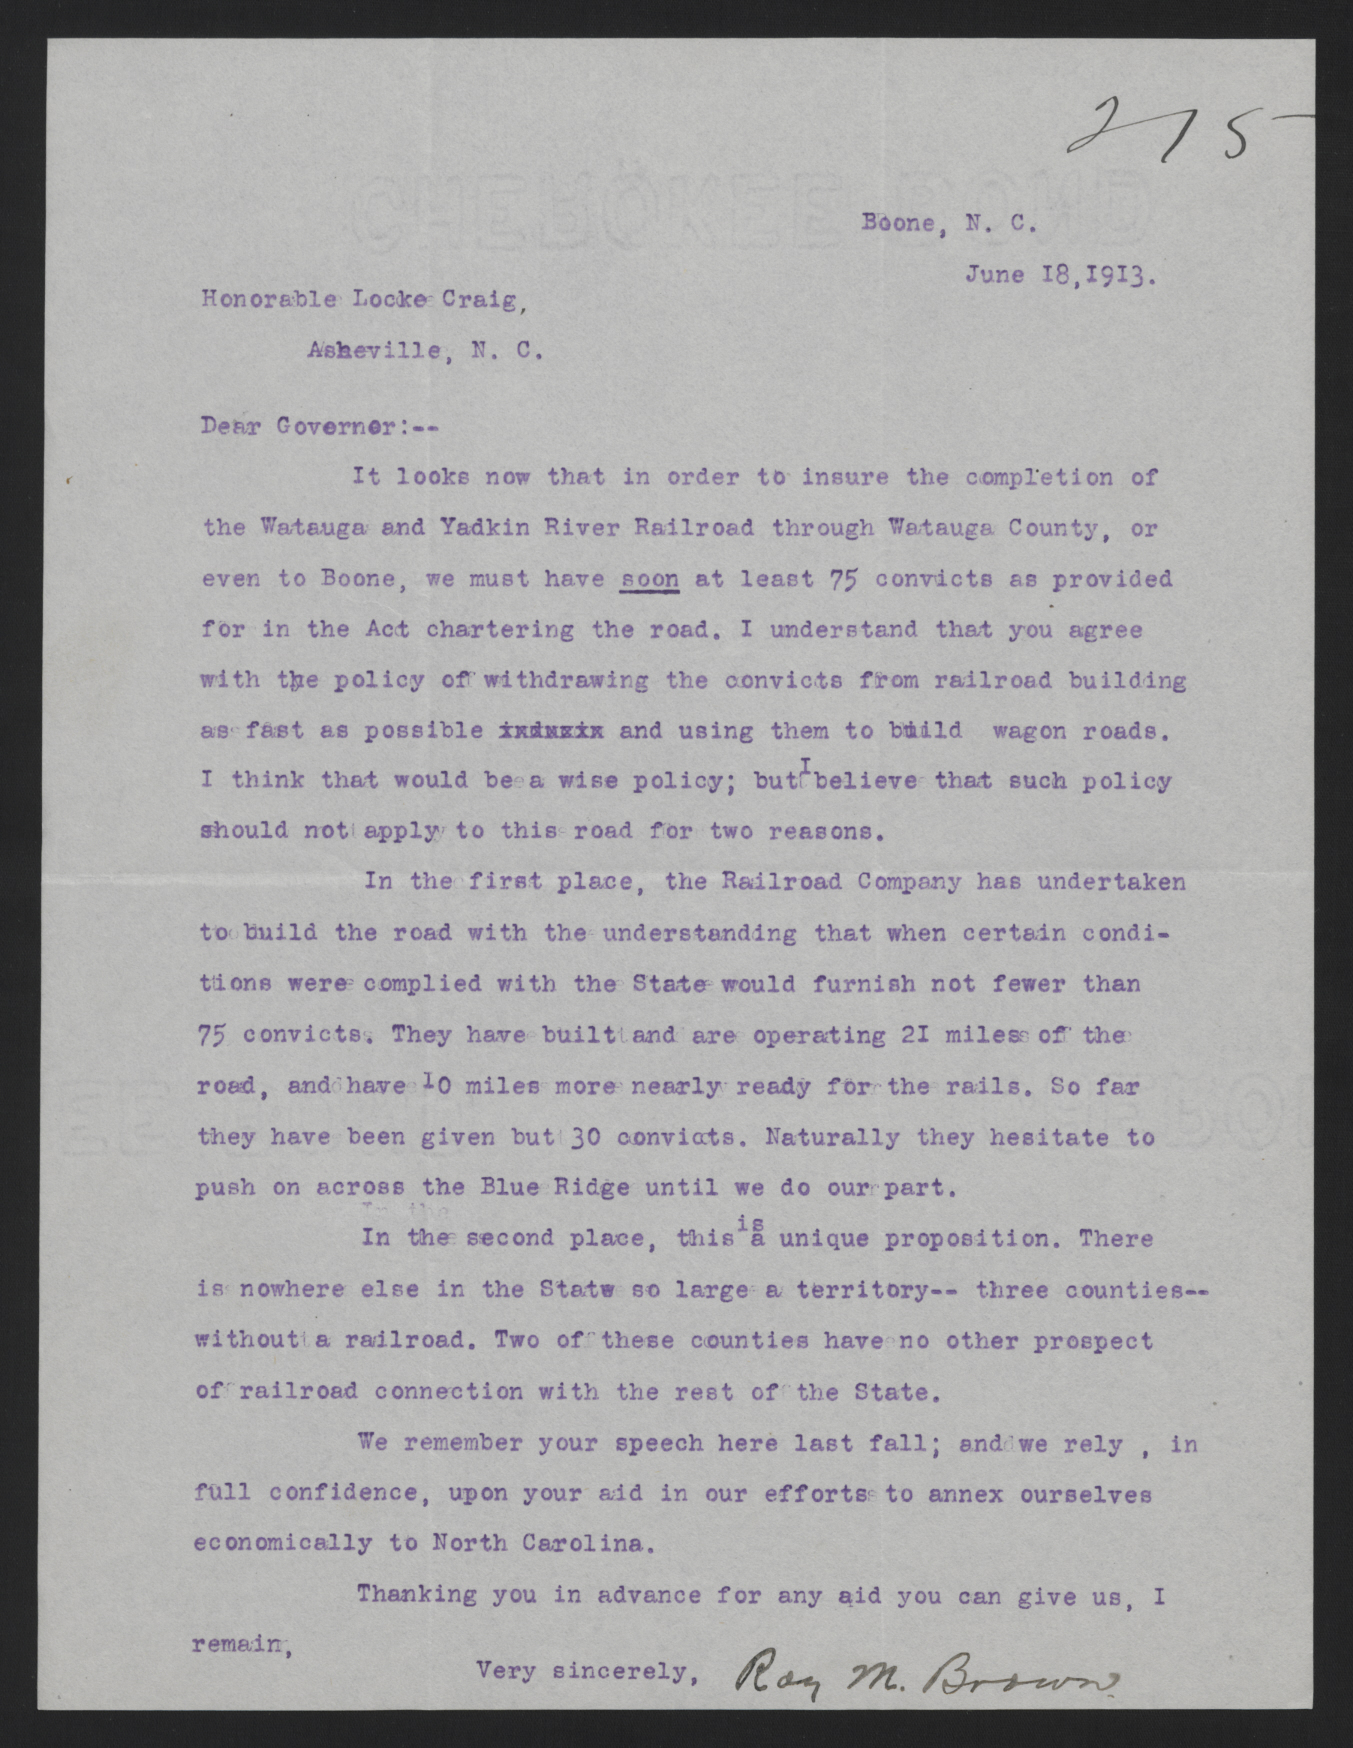 Letter from Brown to Craig, June 18, 1913